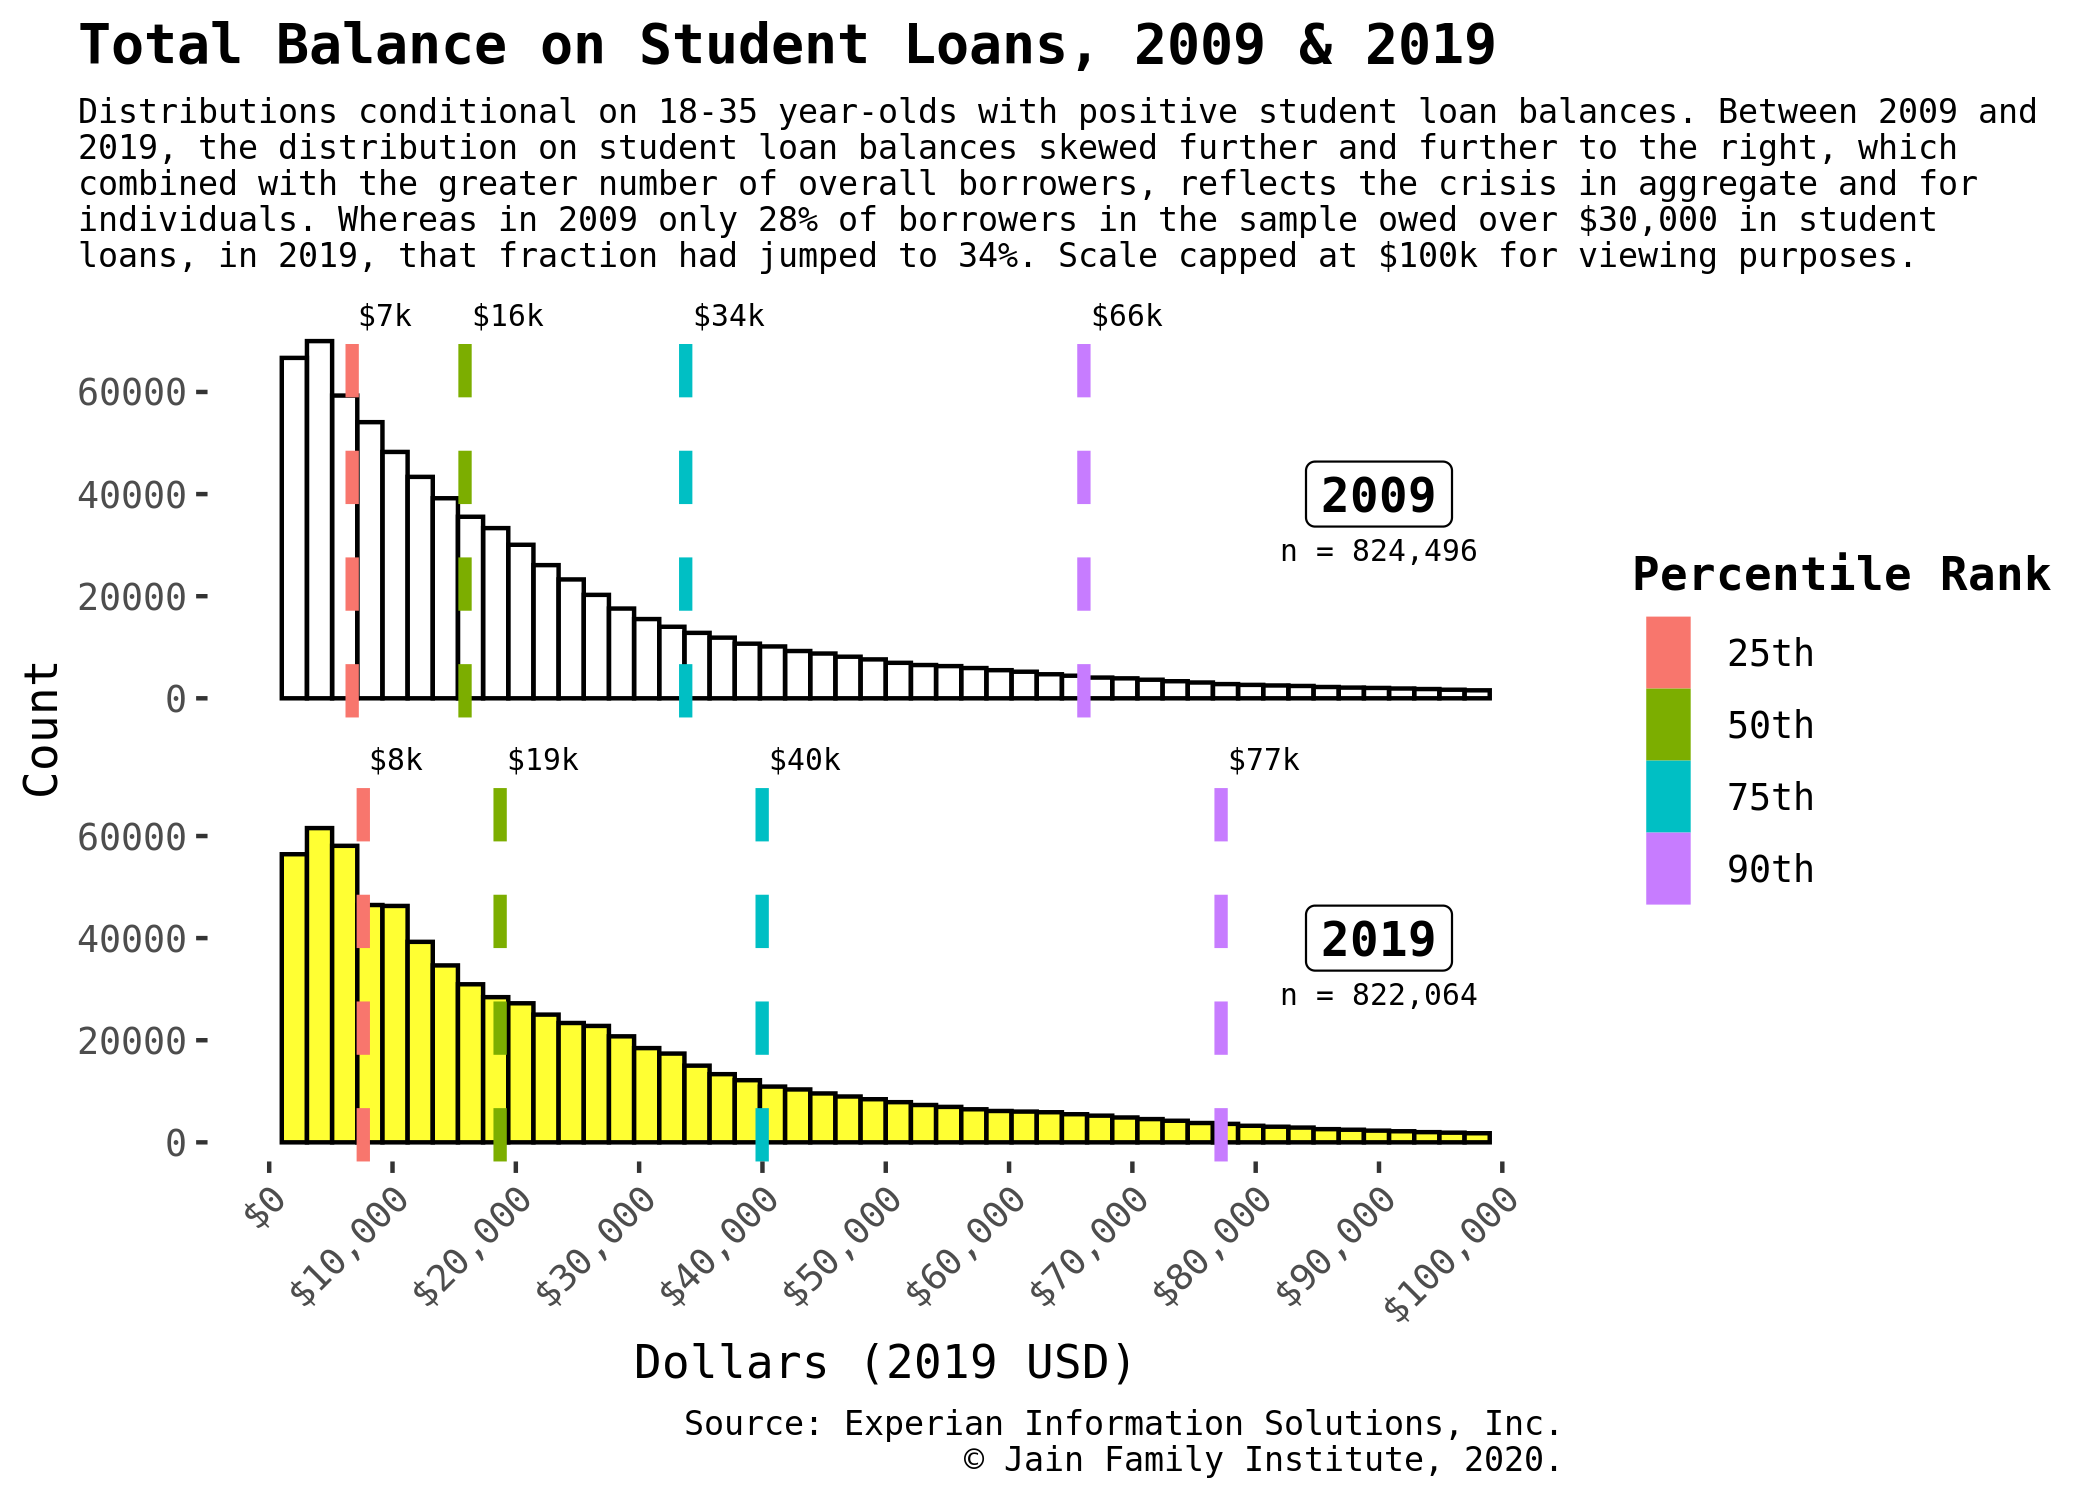 Distributions conditional on 18 to 35-year-olds with positive student loan balances. Between 2009 and 2019, the distribution of student loan balances skewed further and further to the right, which combined with the greater number of overall borrowers, reflects the crisis in aggregate and for individuals. Whereas in 2009 only 28% of borrowers in the sample owed over $30,000 in student loans, in 2019, that fraction had jumped to 34%. Scale capped at $100,000 for viewing purposes.